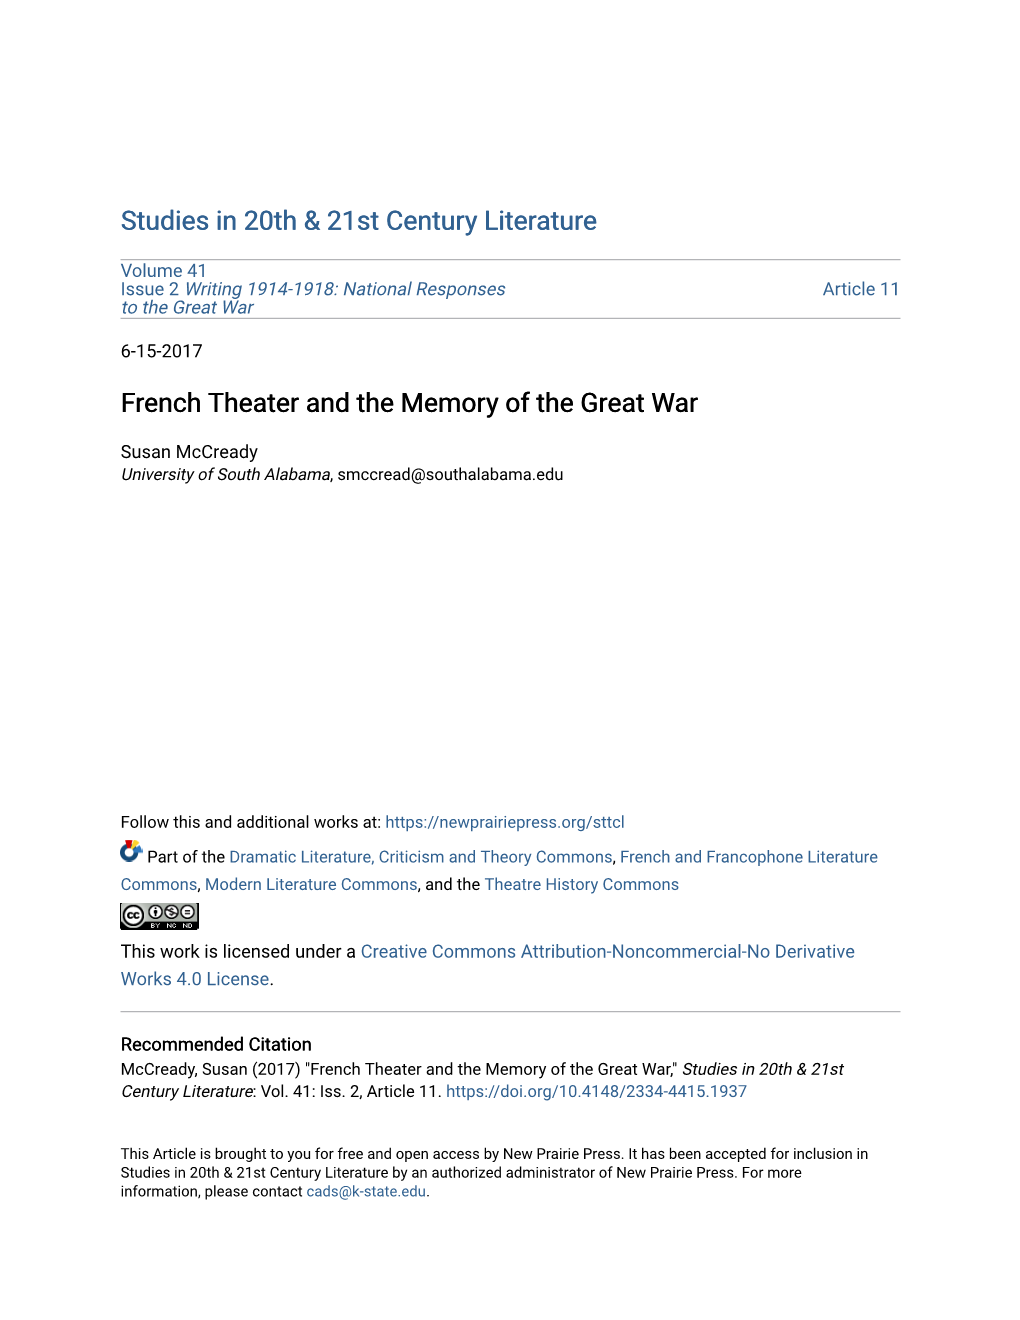 French Theater and the Memory of the Great War